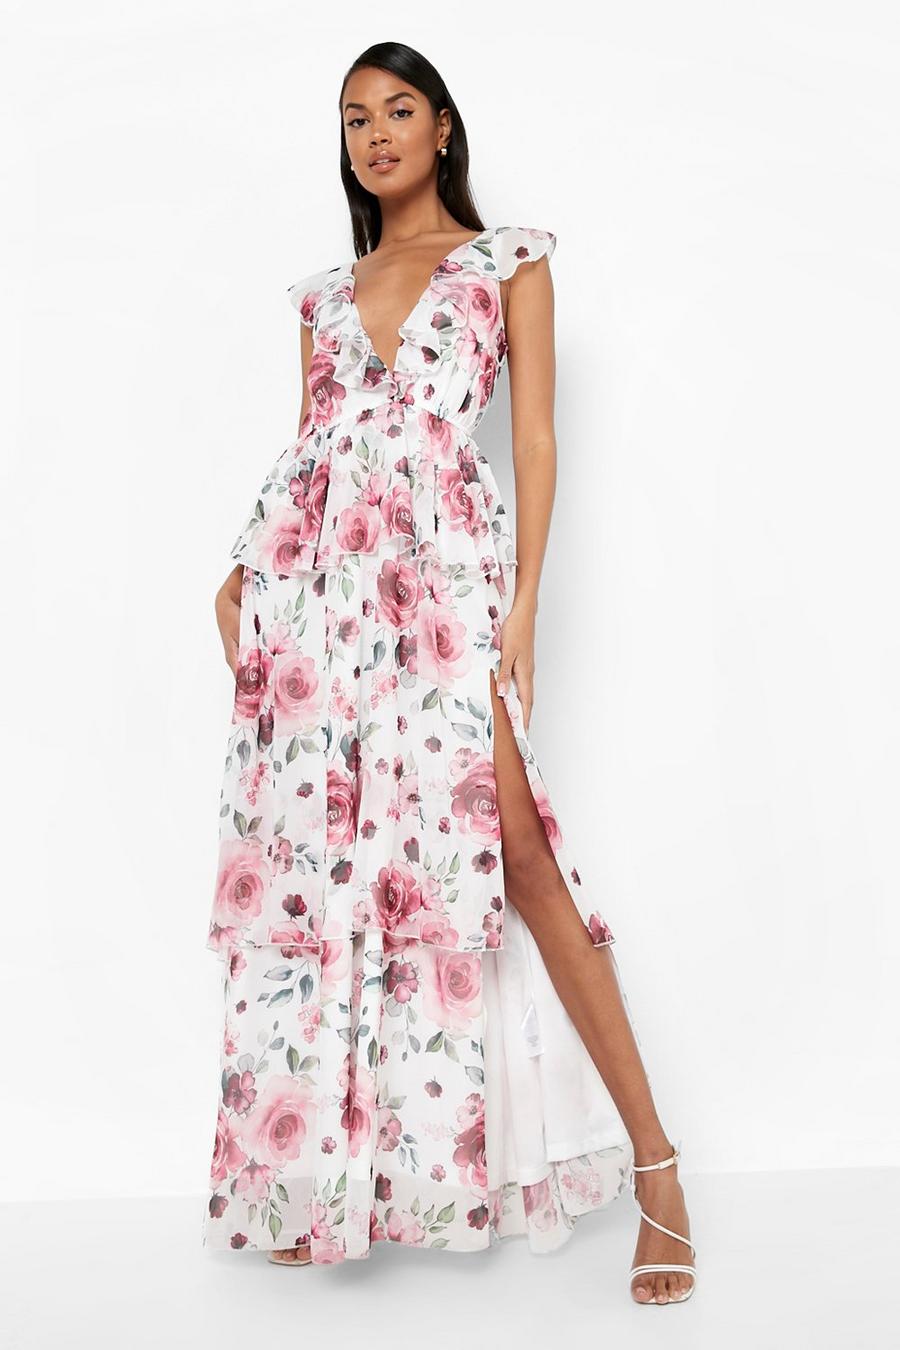 Floral Tiered Dress for Women's High Street Fashion